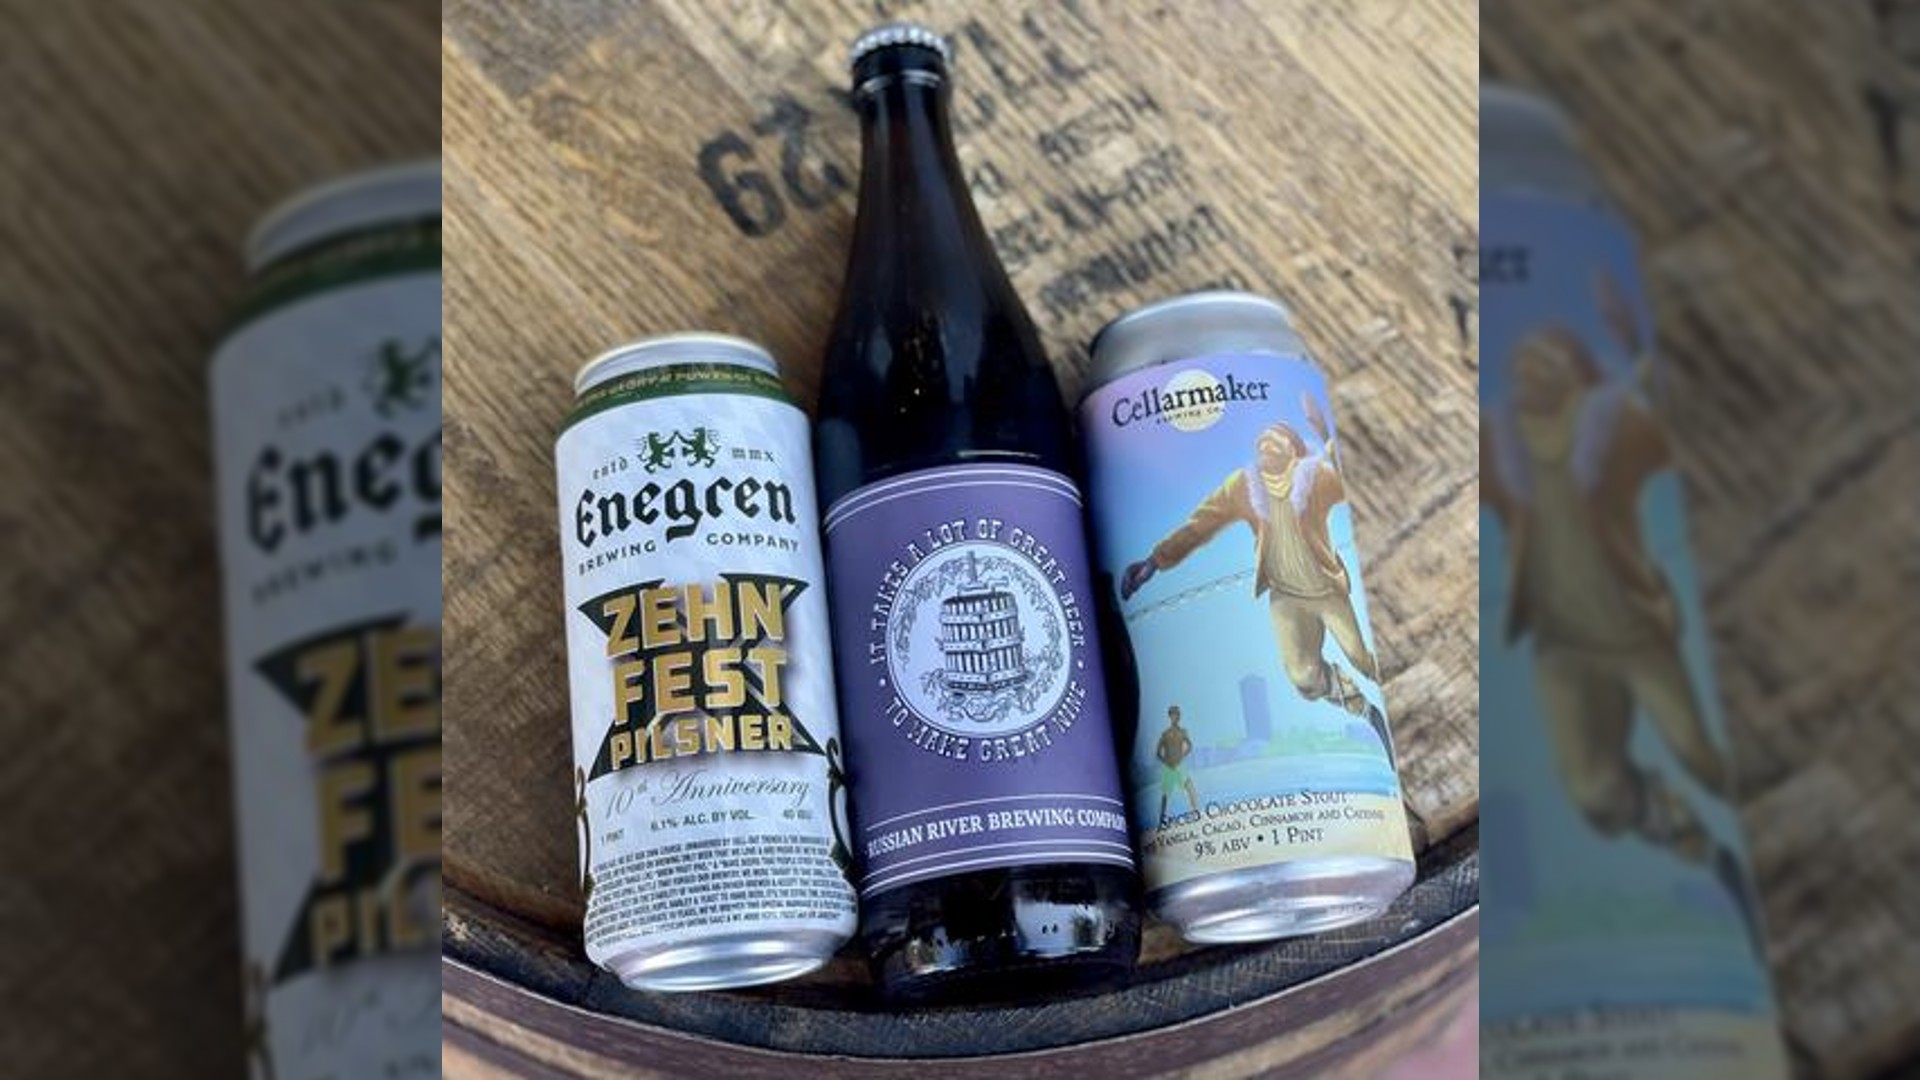 Gene's Beer Picks for the week of August 30, 2021, Russian River's It Takes a Lot of Beer to Make Great Wine APA, Enegren's Zehnfest Pilsner, and Cellarmaker Infinite Stout